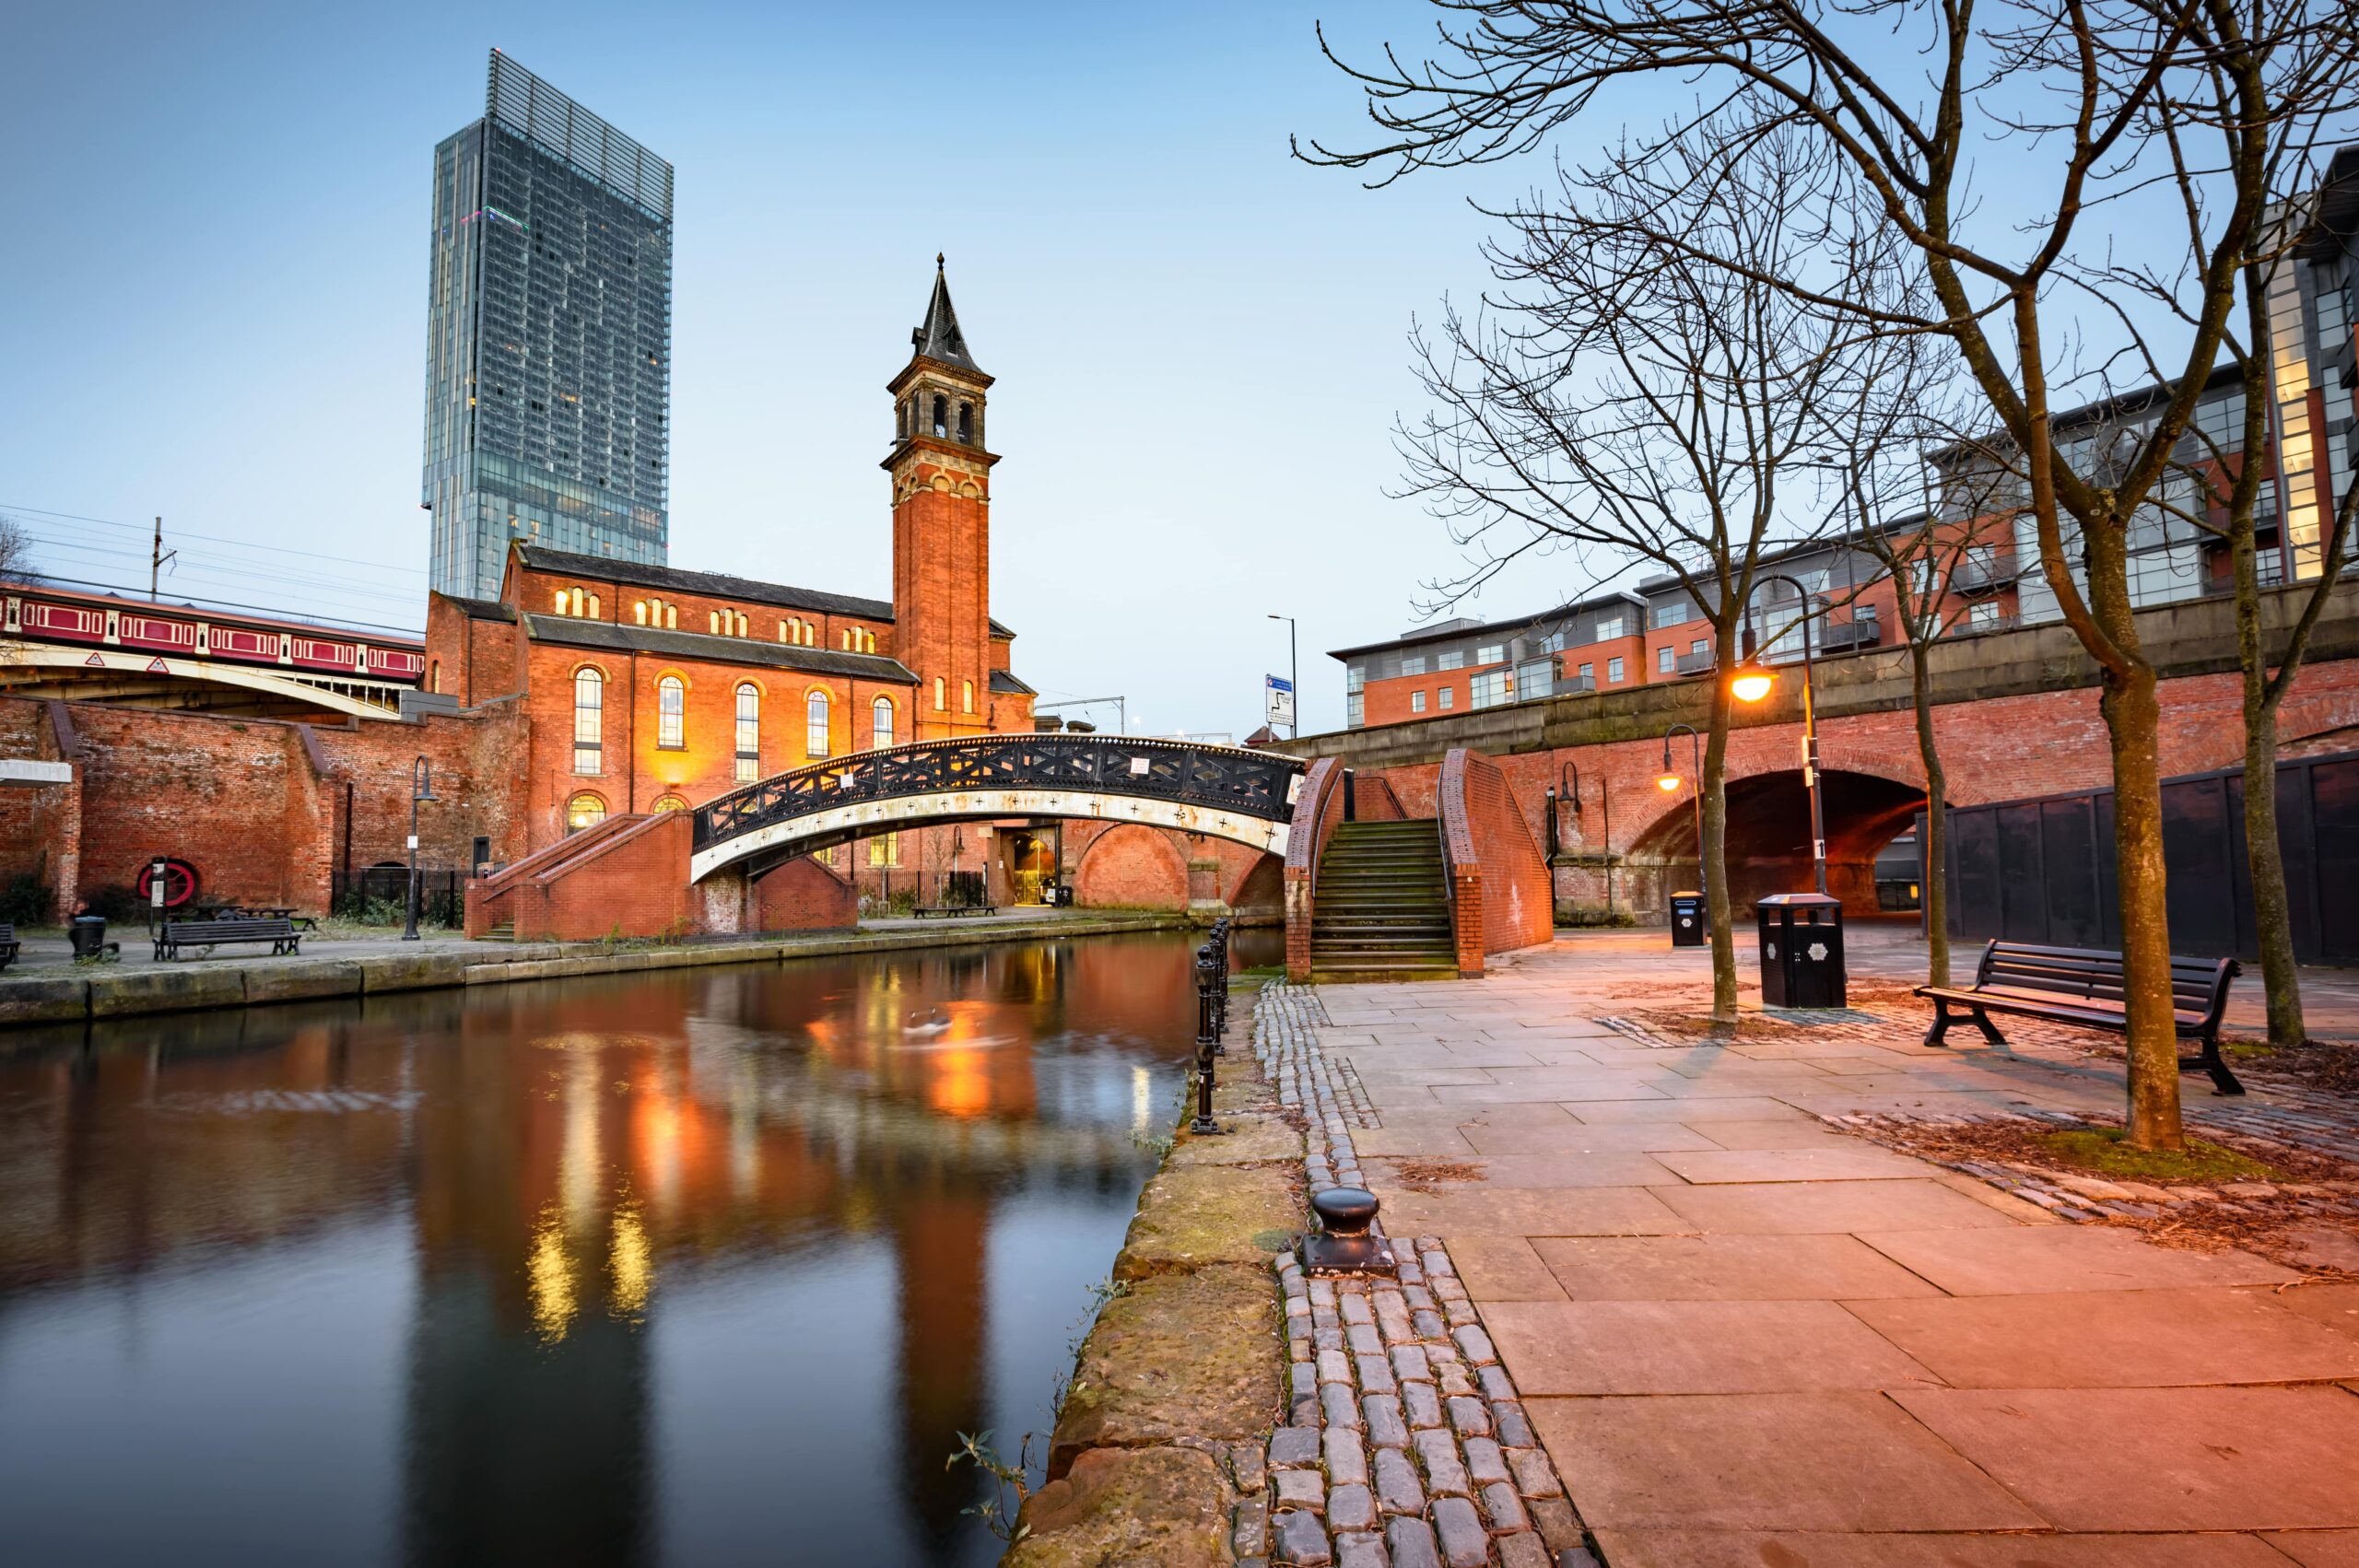 London to Manchester - from £27.00